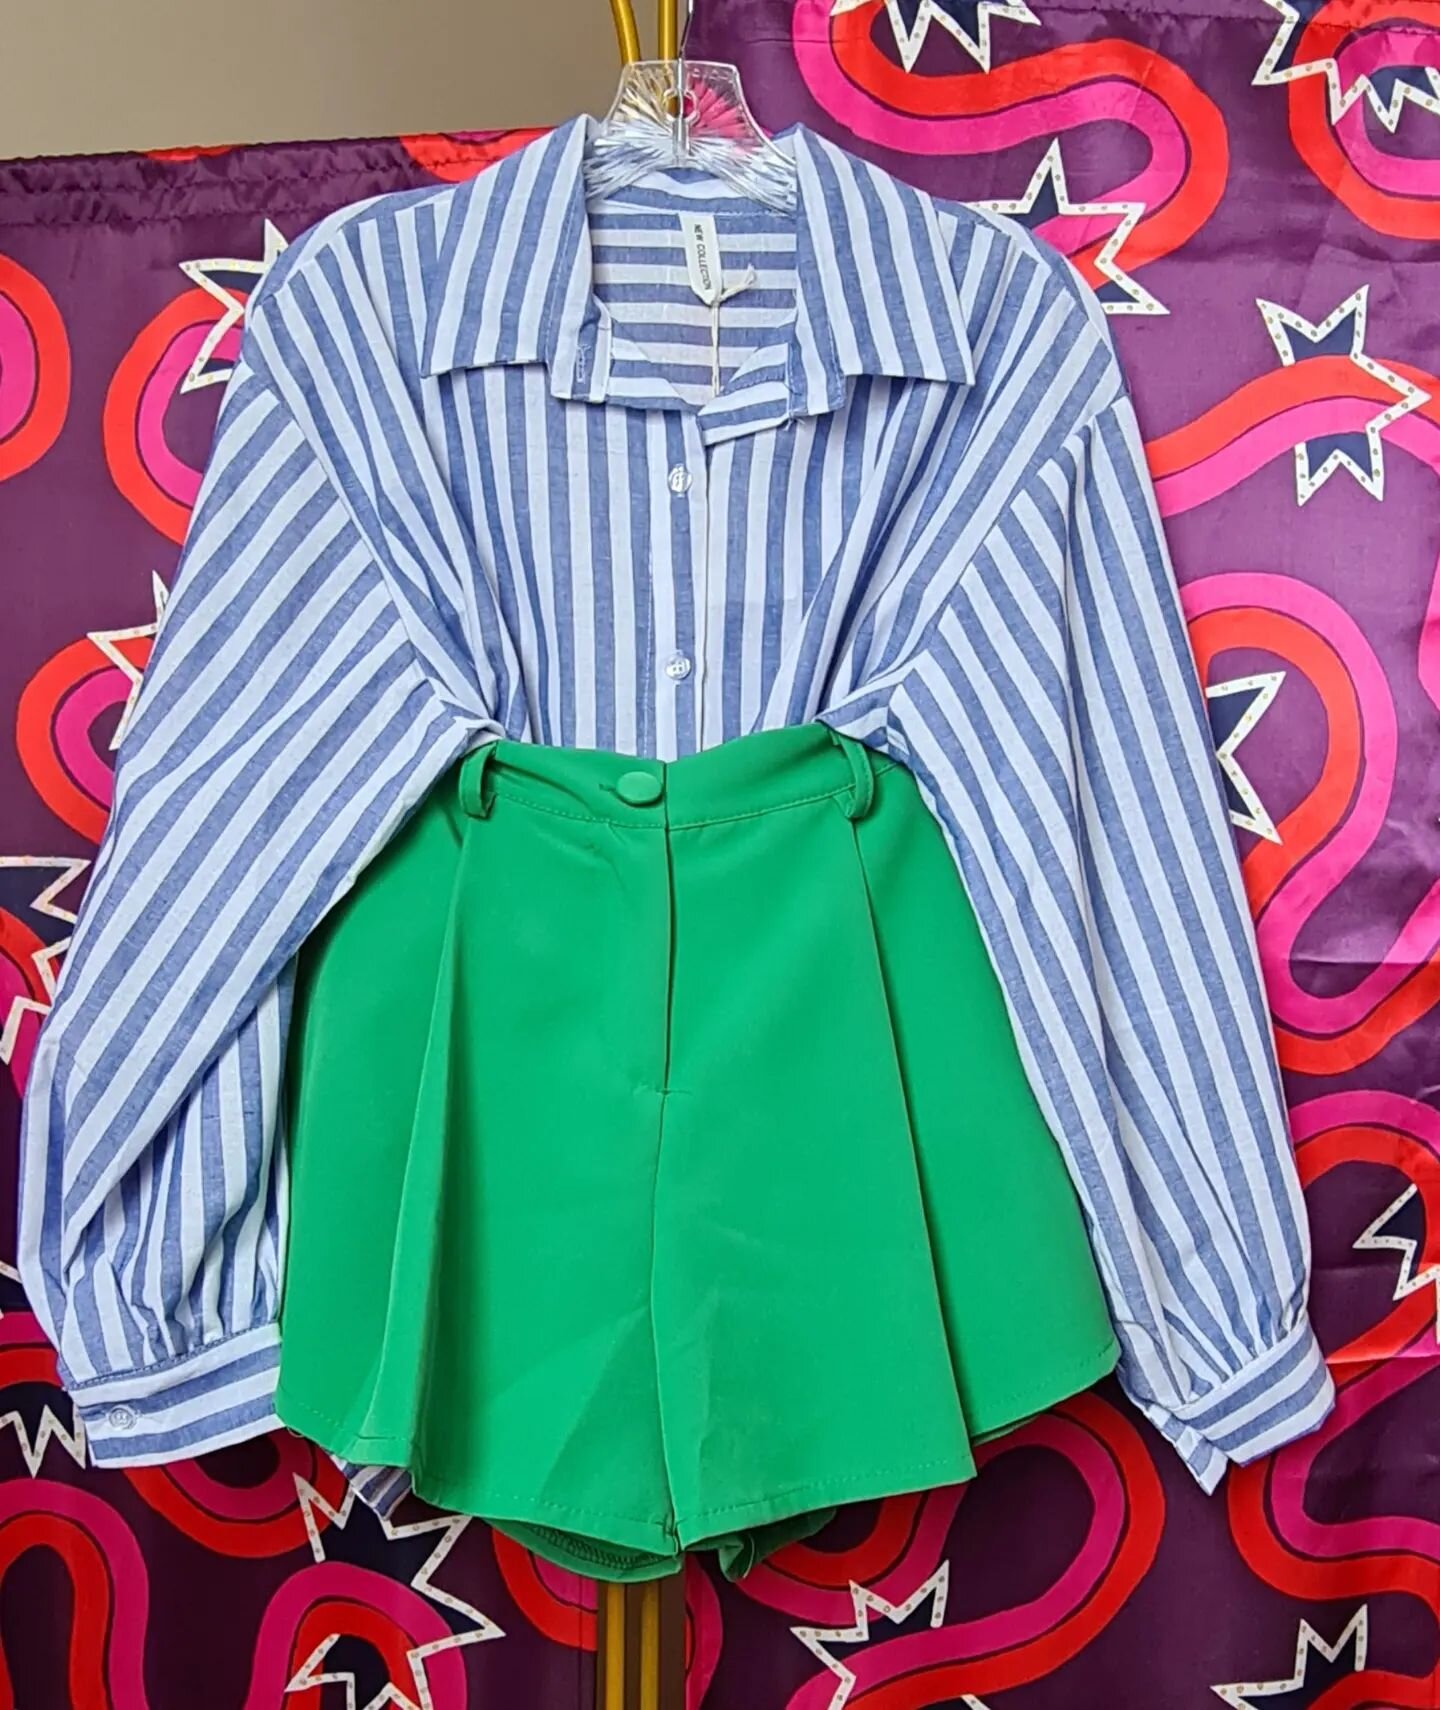 Outfit Inspo.
Keeping it casual with a oversized striped shirt and green flared shorts. 

#thepixieboutique #pixieboutique  #instafashion #instastyle #instafashionistas #edinburgh #fashioninfluencers #influencerstyle #londonfashion #newcastle #manche